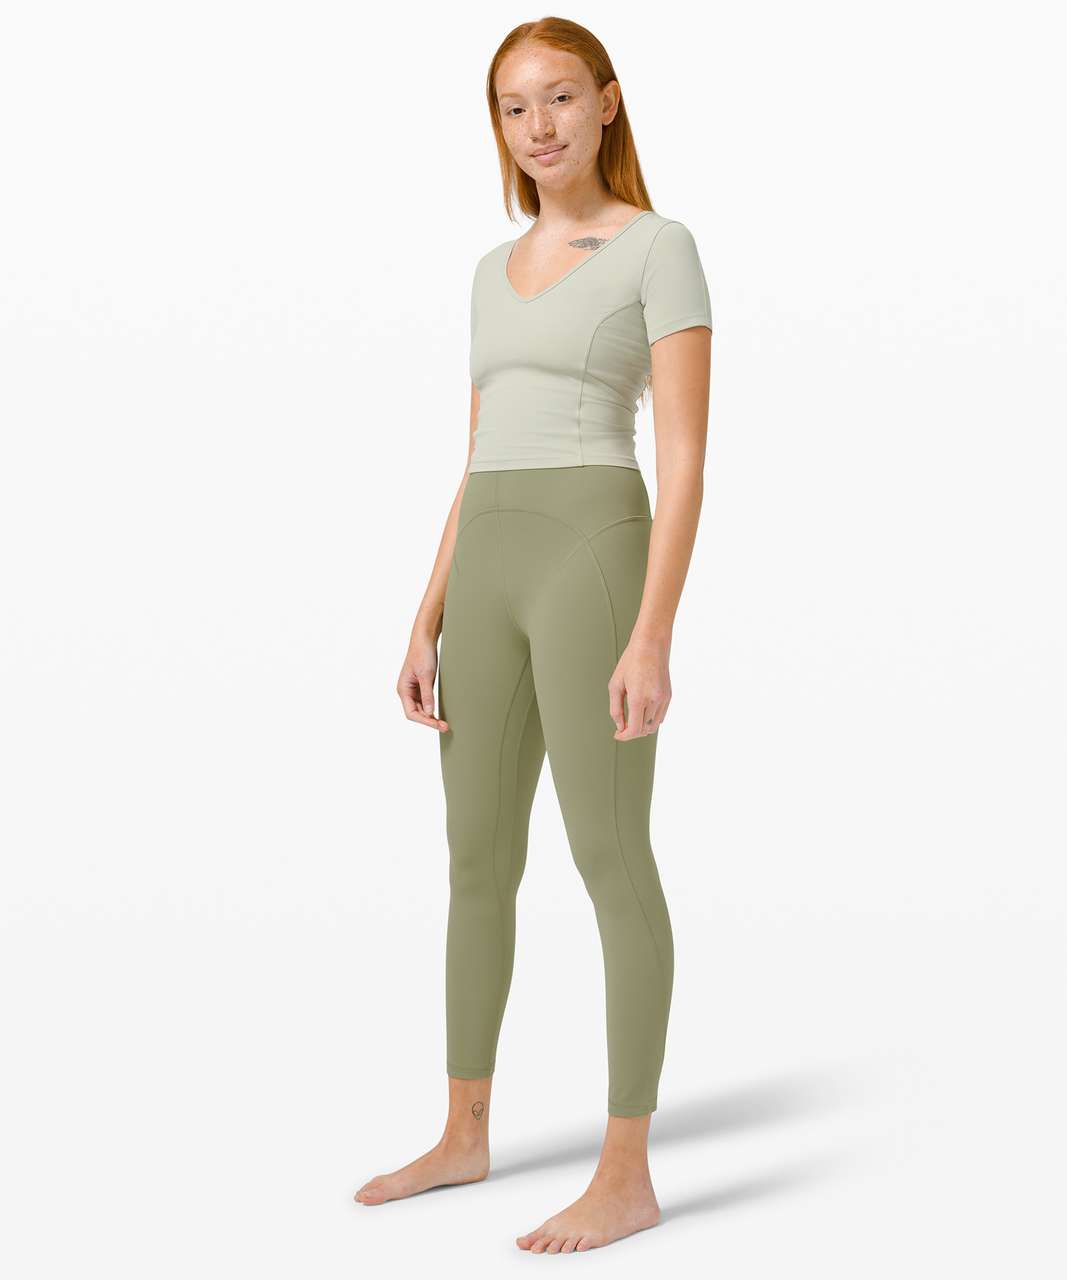 Lululemon Size 18 Align HR Pant Tight 25” Nulu Rosemary Green RSMG NWT  Naked 